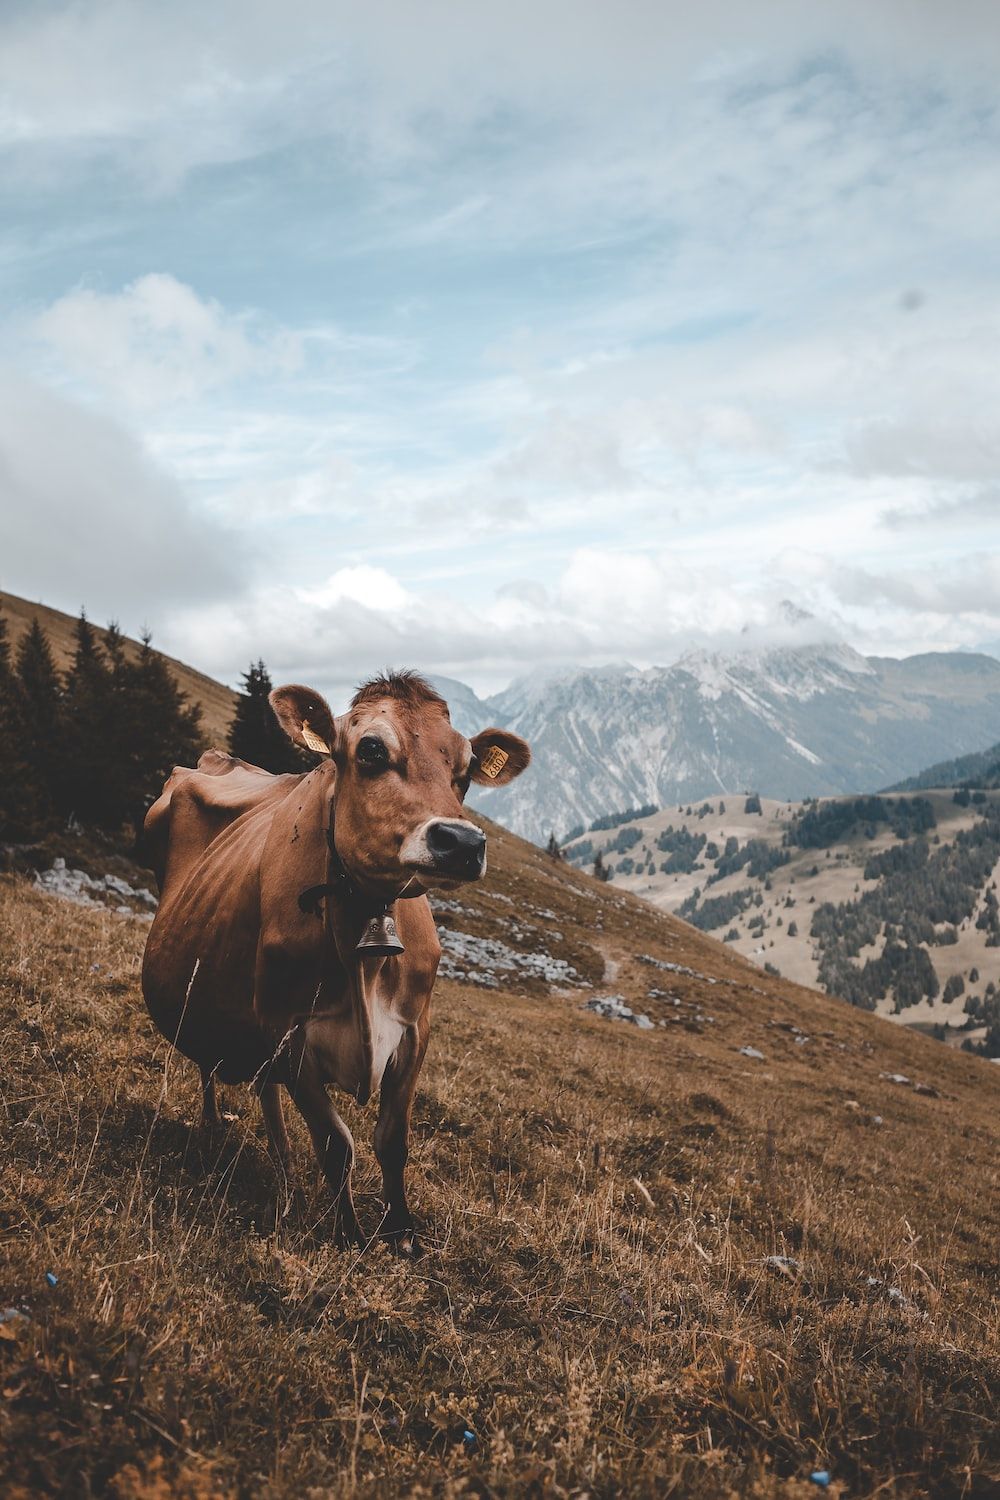 A cow standing on a grassy hillside with mountains in the background. - Cow